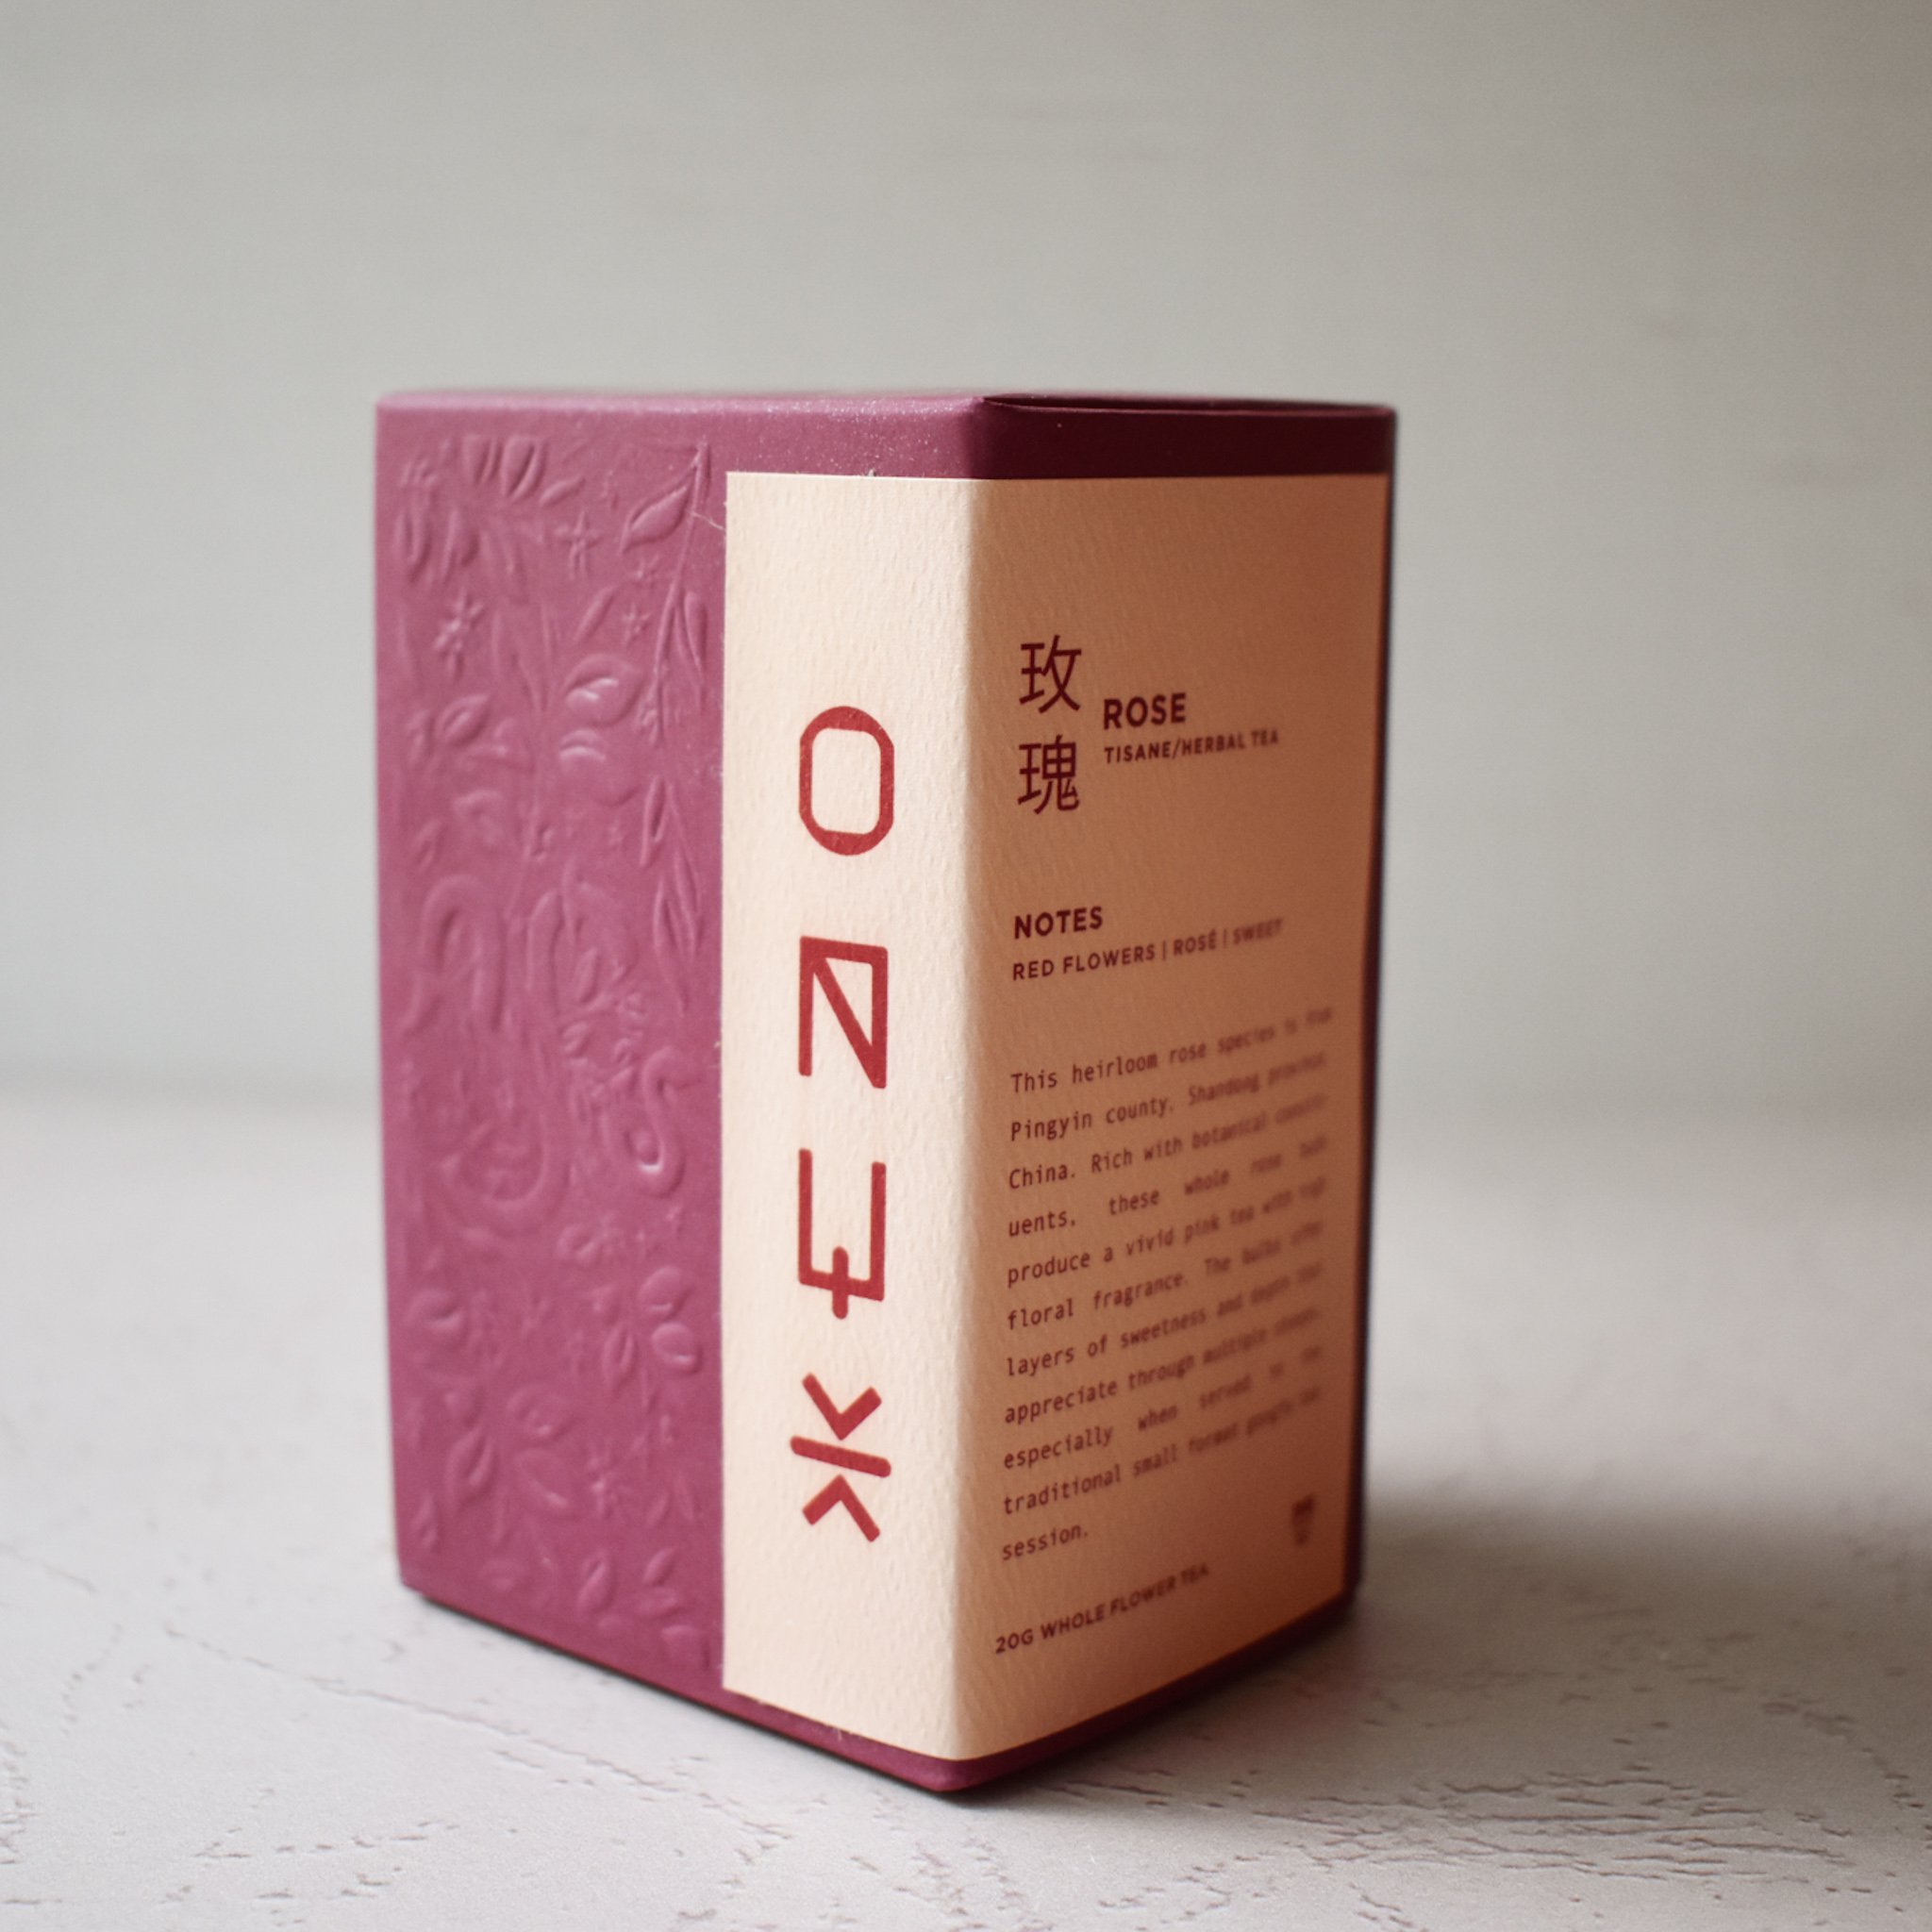 Interview with Founder of Onyx Coffee Lab: Jon Allen